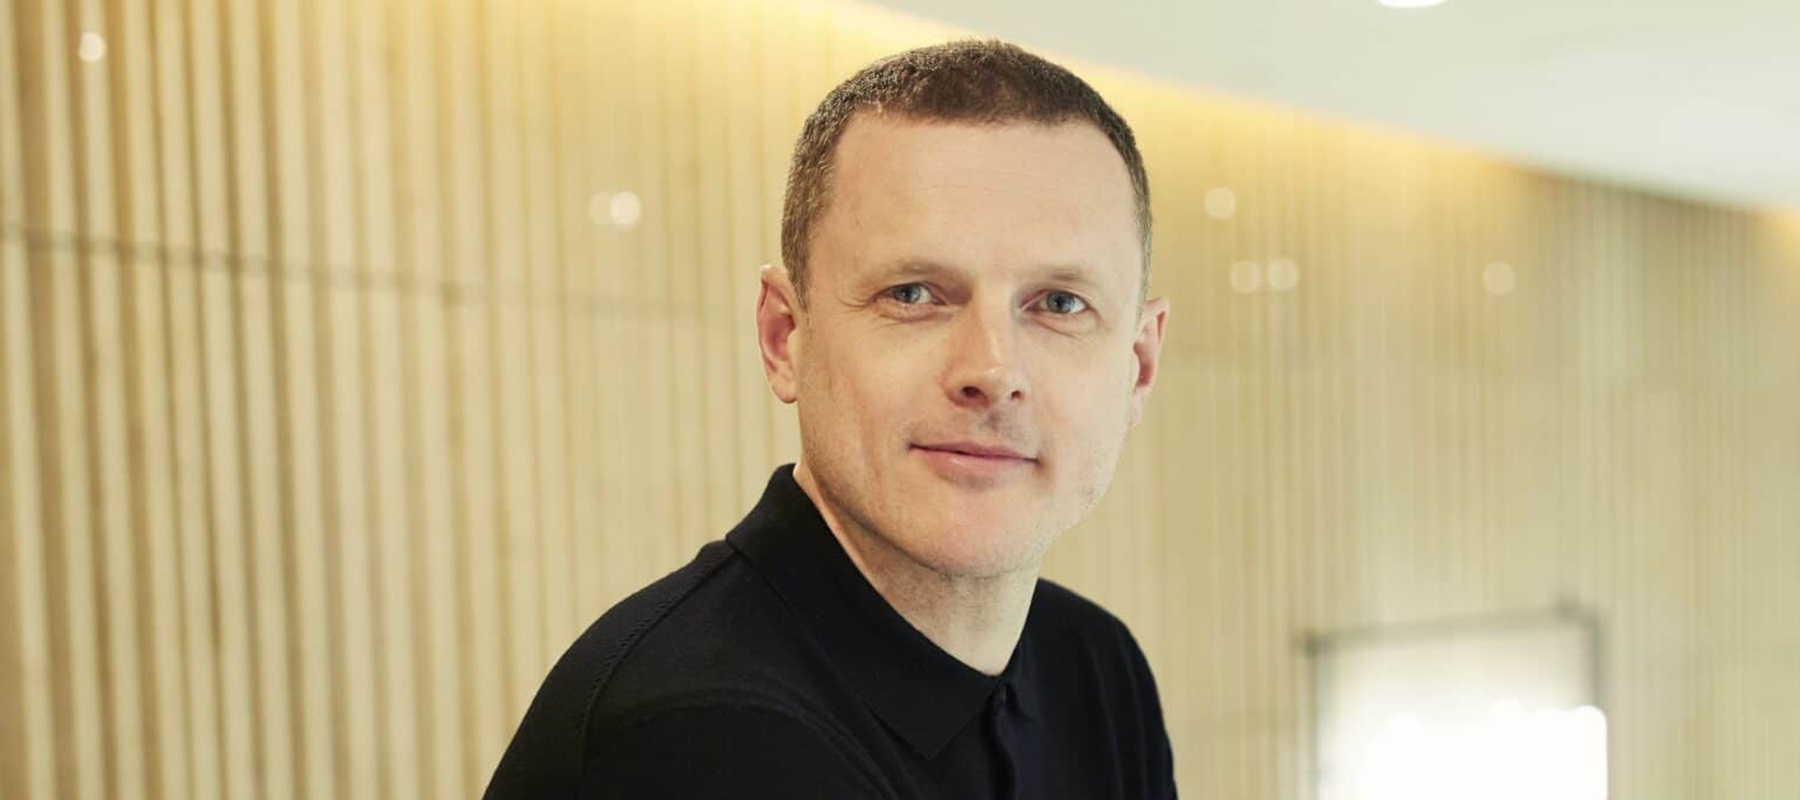 Media company Wavemaker appoints Chris Worsley as Global Performance Lead